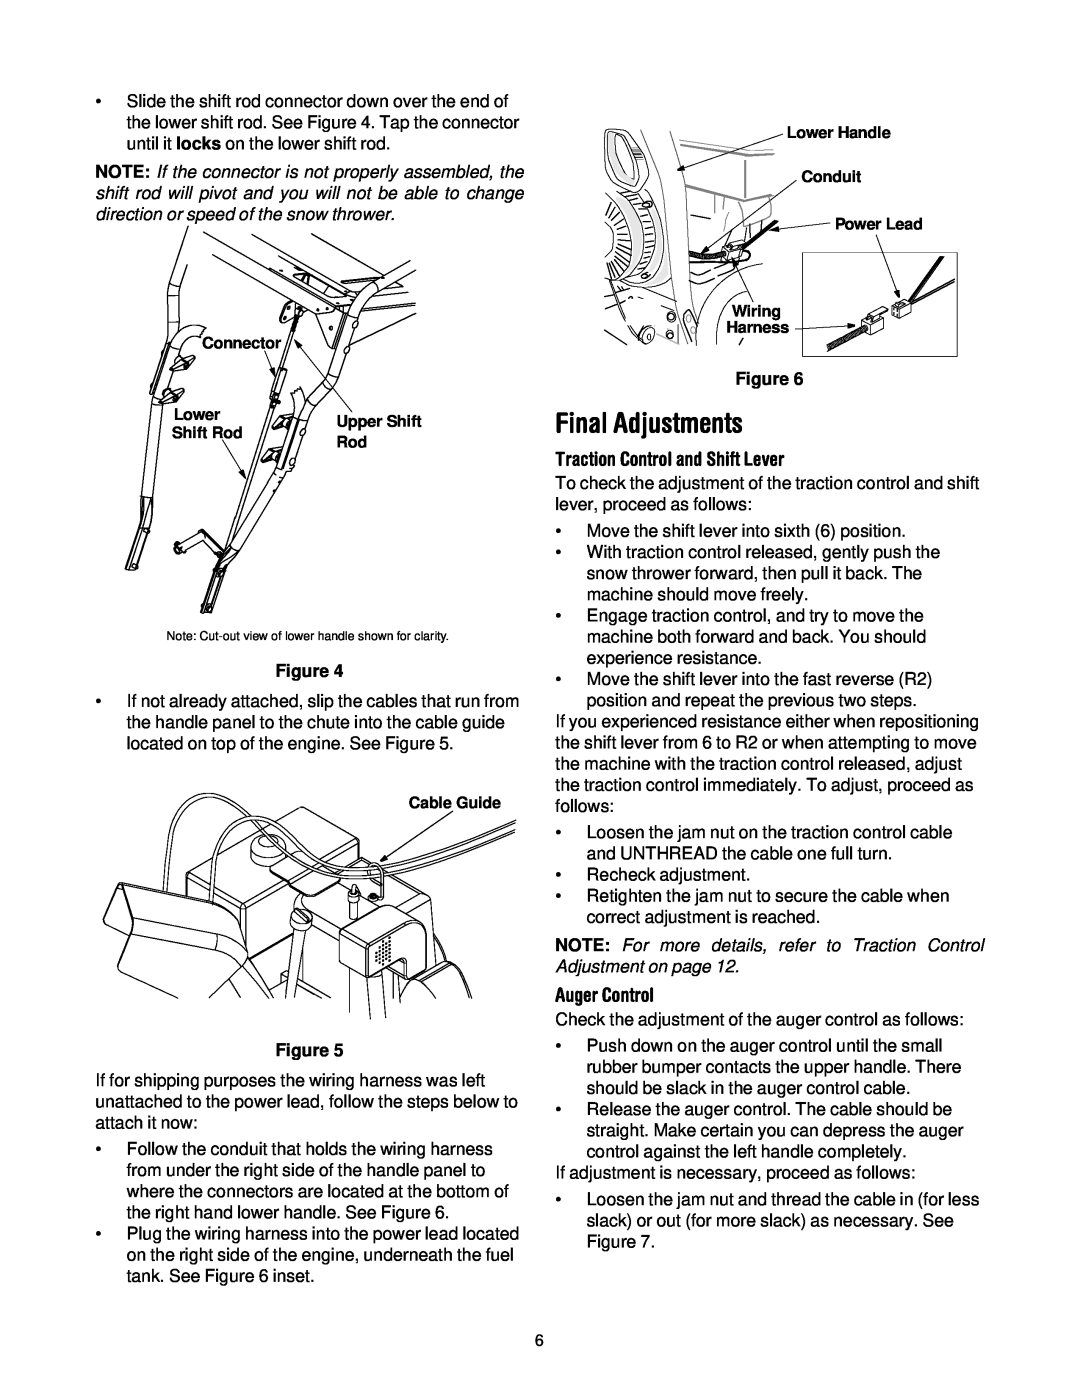 Yard-Man 31AH553G401 manual Final Adjustments, Traction Control and Shift Lever, Auger Control 